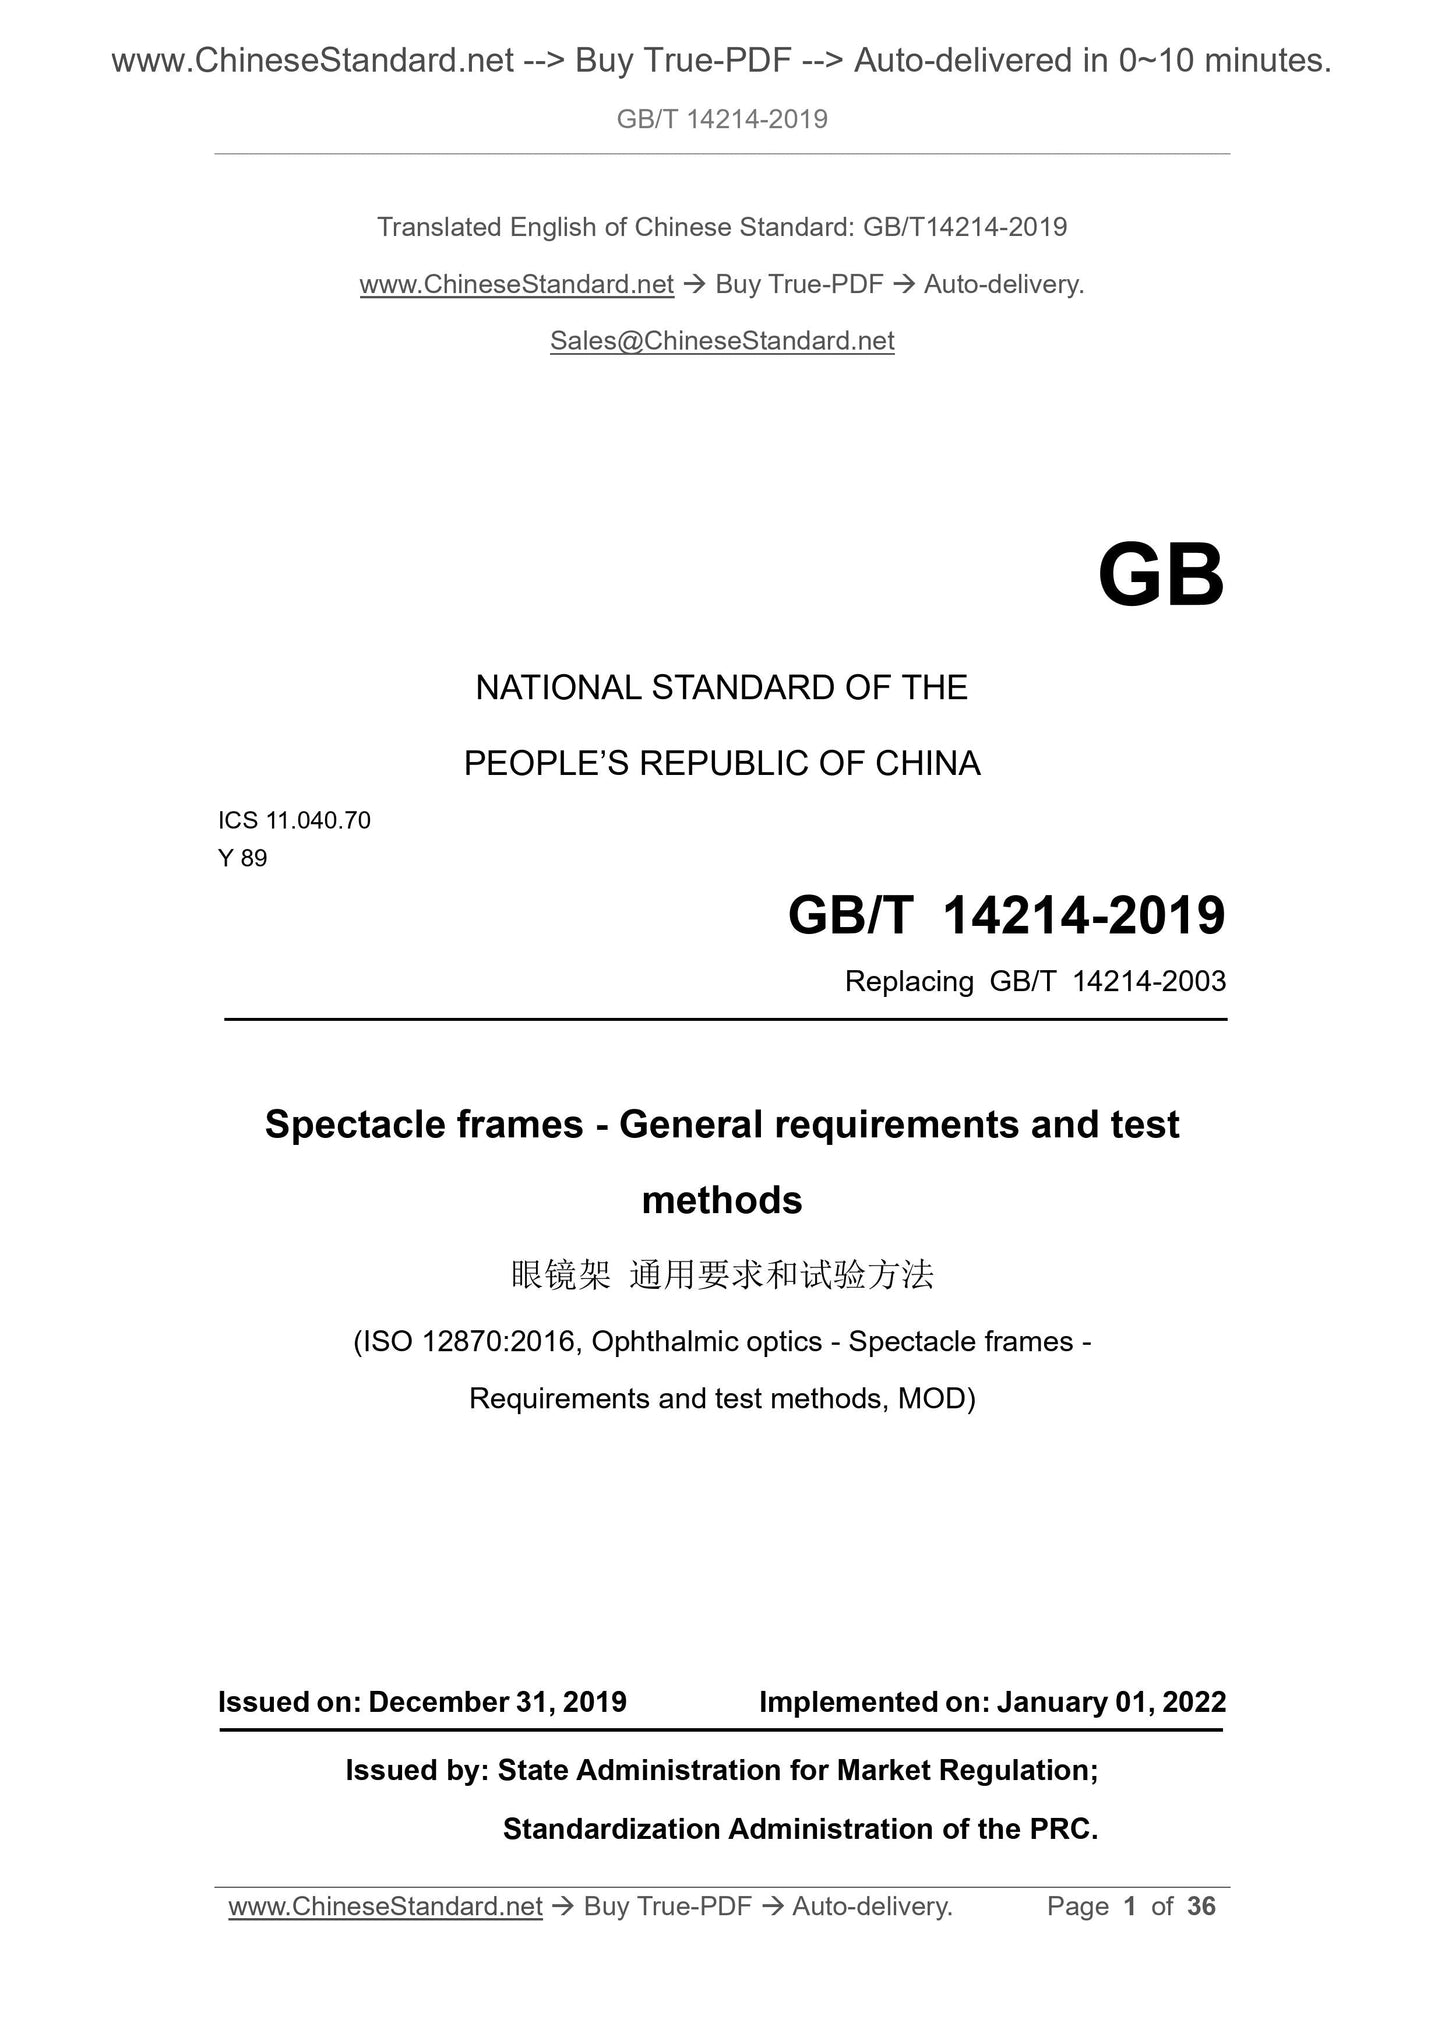 GB/T 14214-2019 Page 1